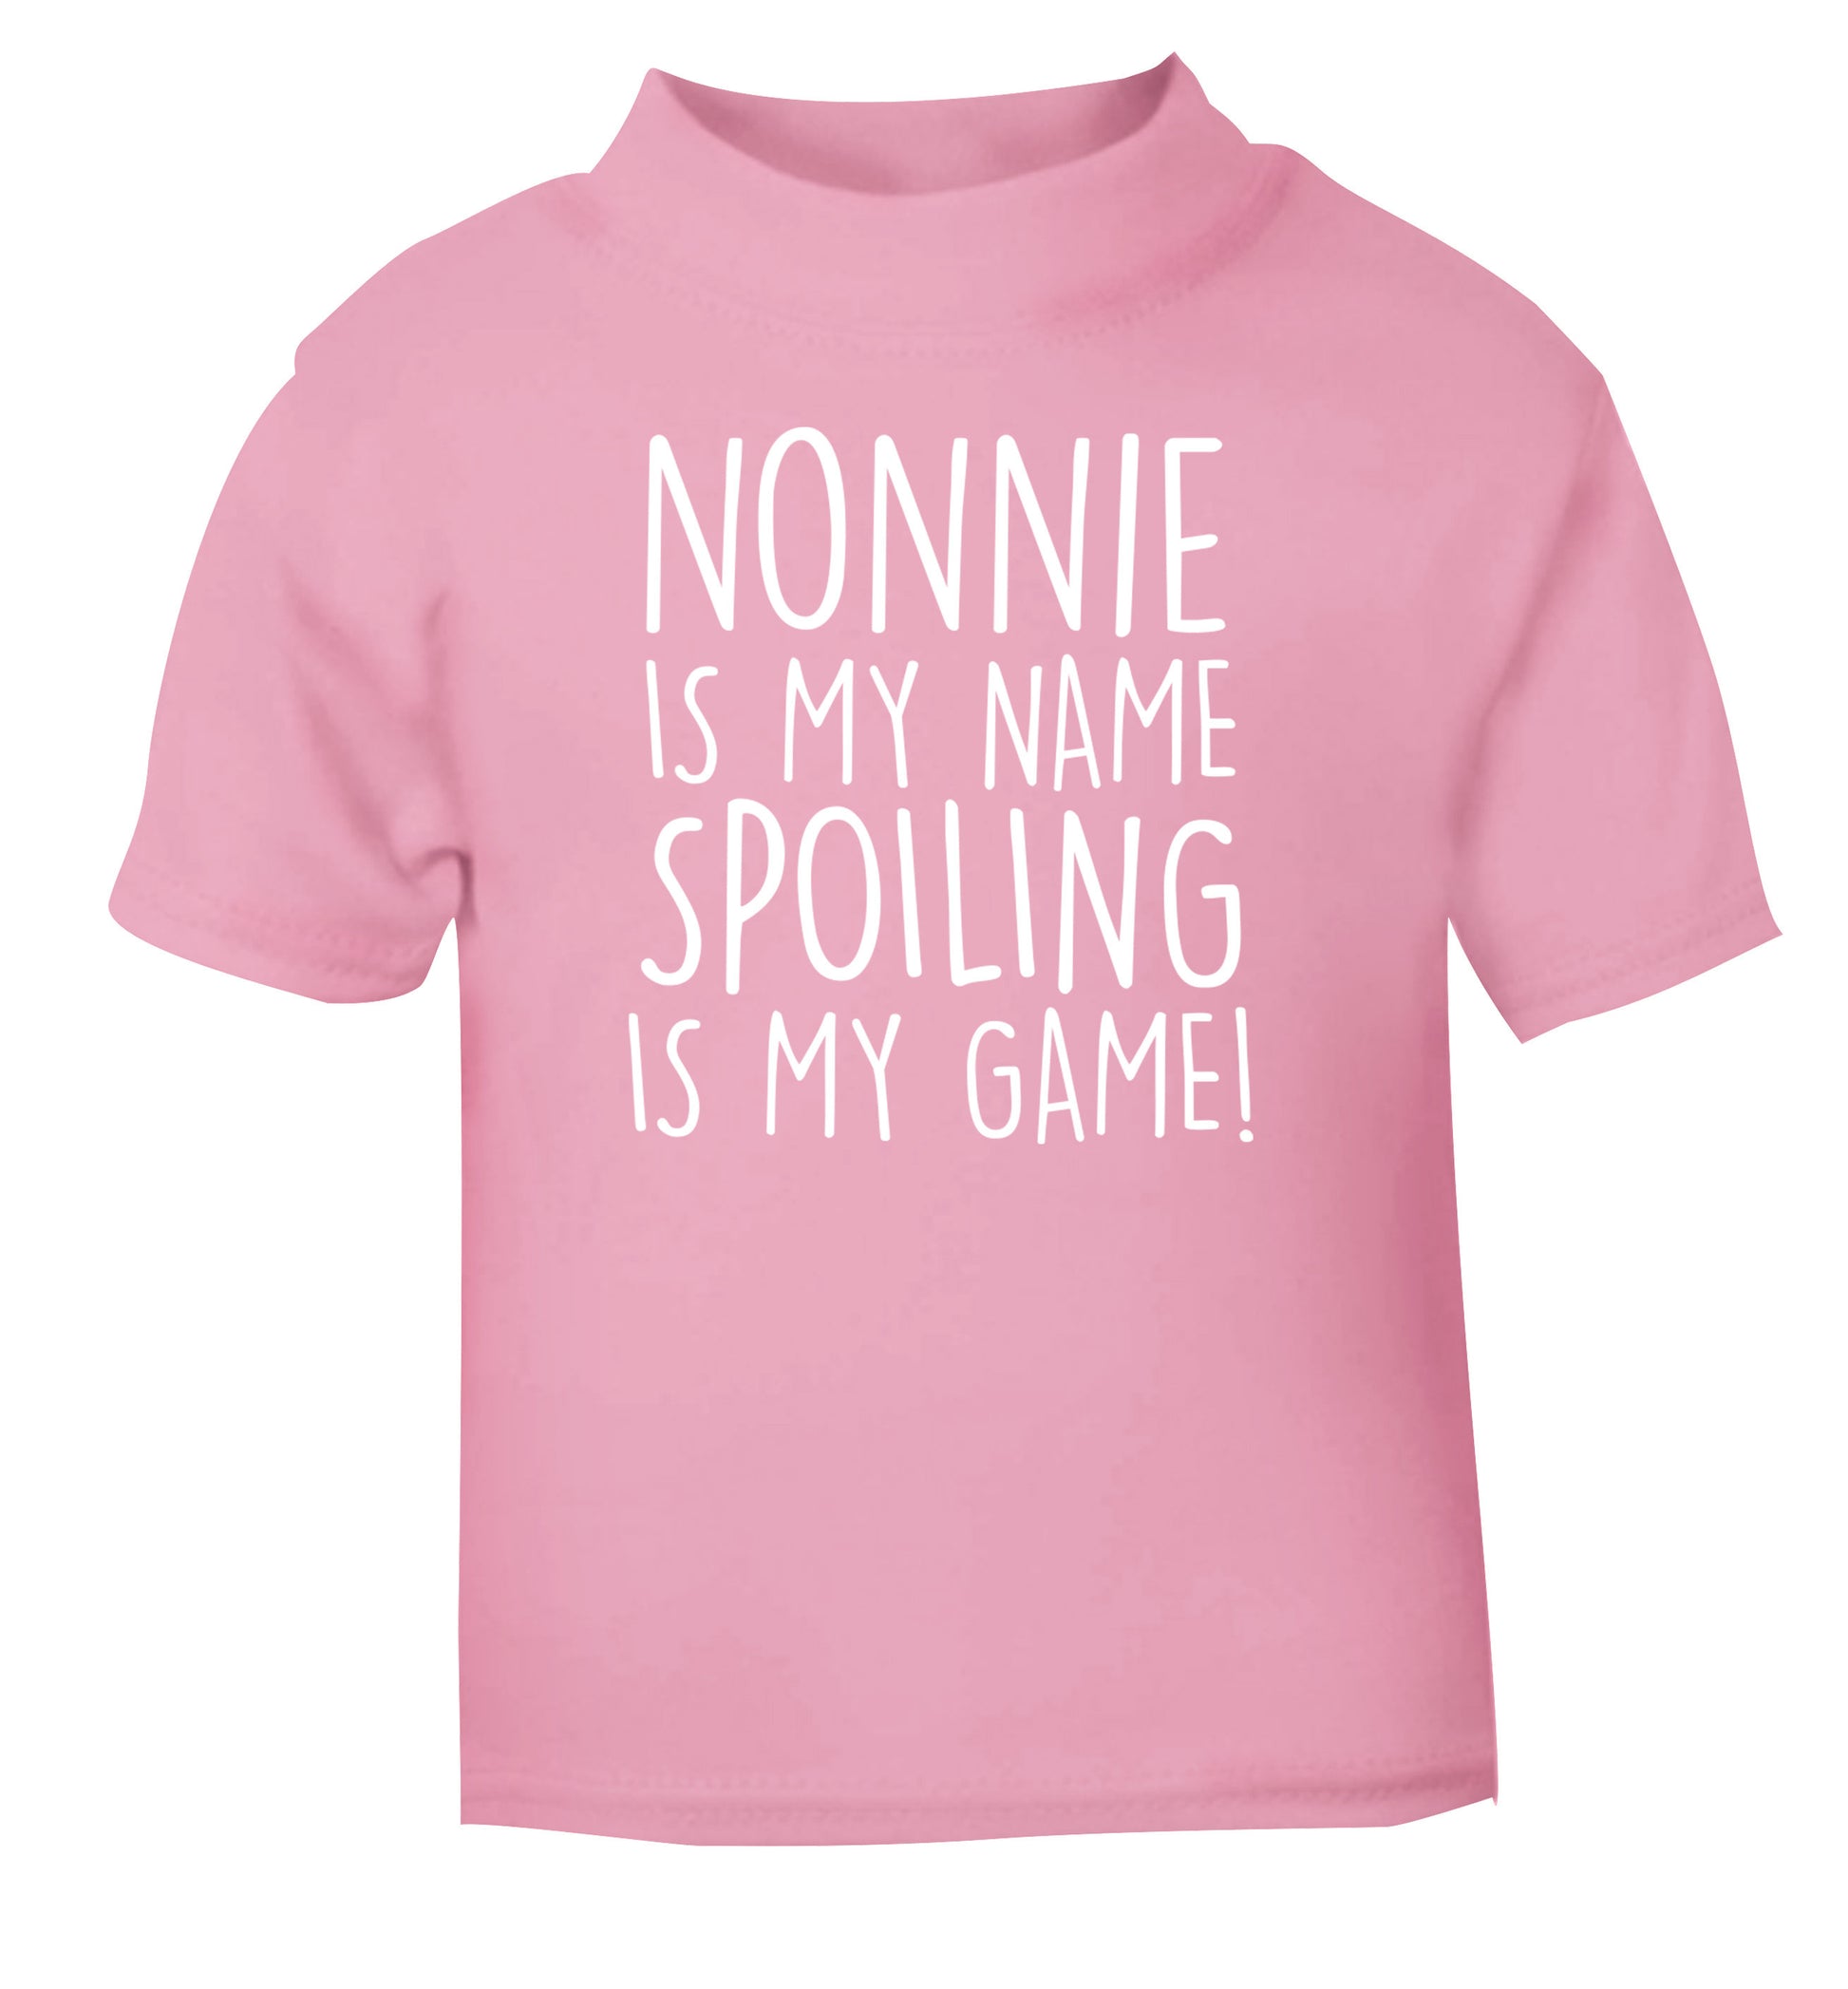 Nonnie is my name, spoiling is my game light pink Baby Toddler Tshirt 2 Years